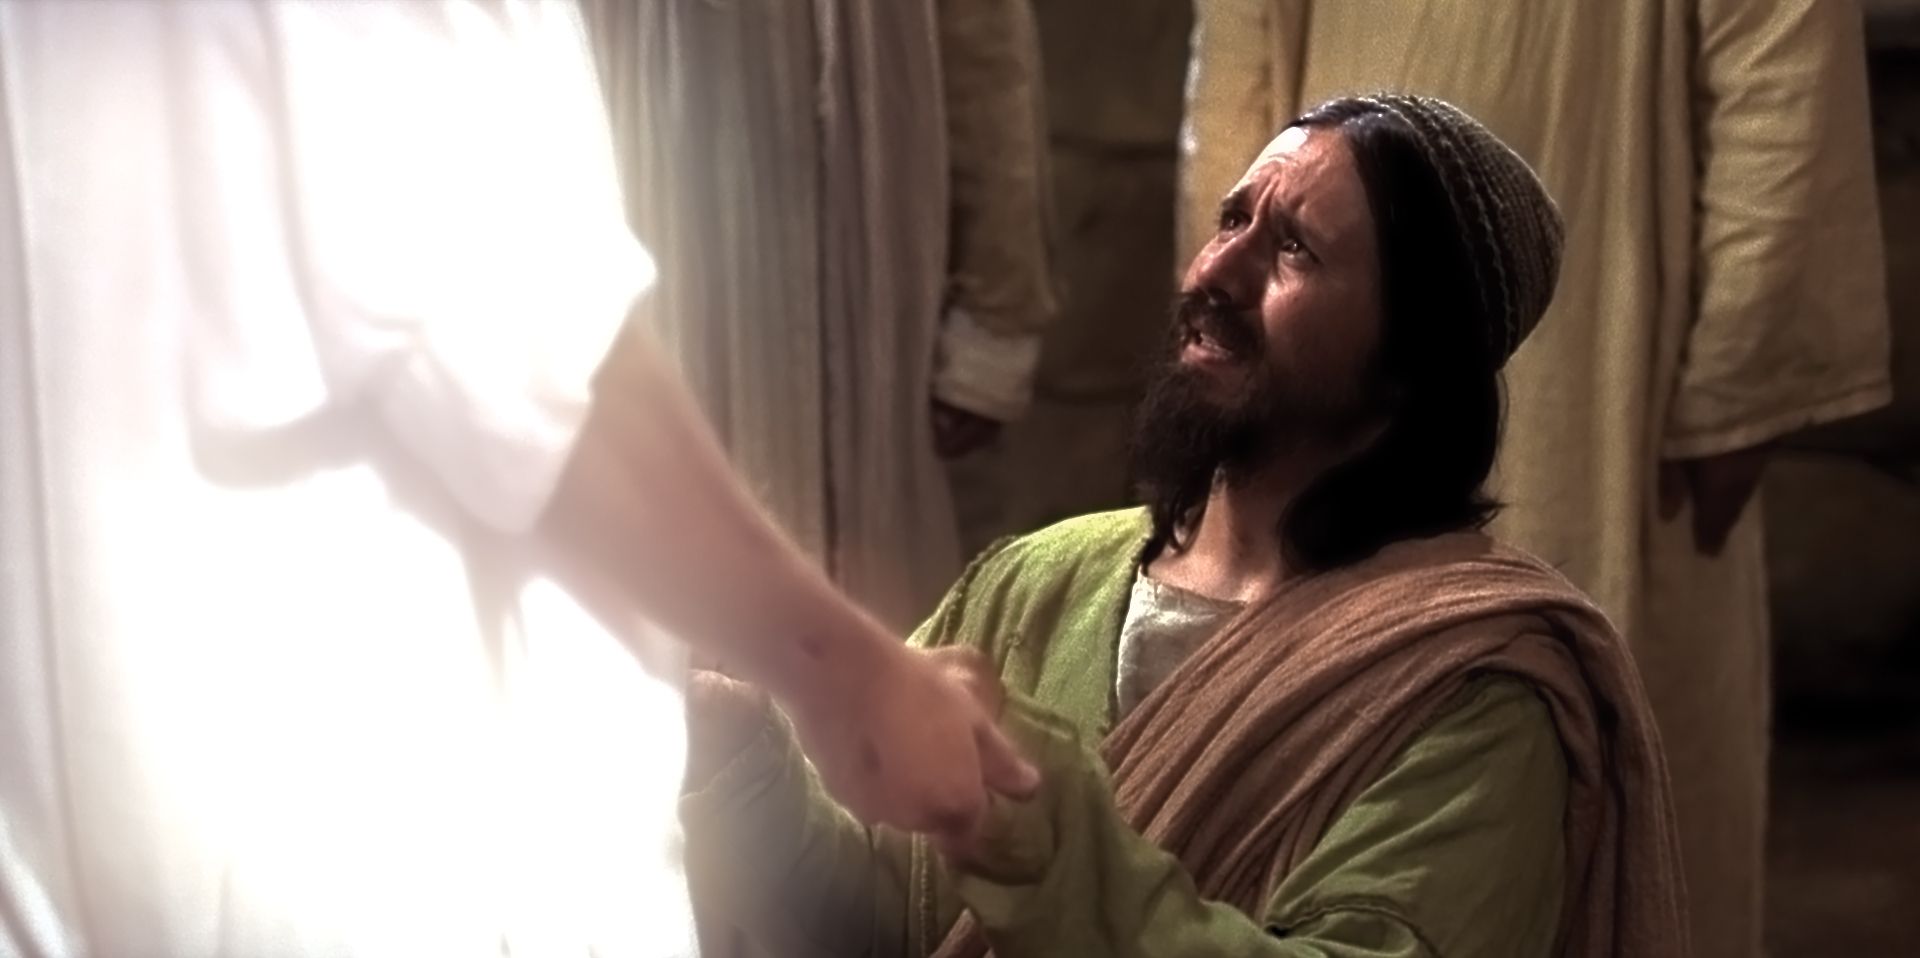 Thomas believes in Christ's Resurrection after Christ appears to him.